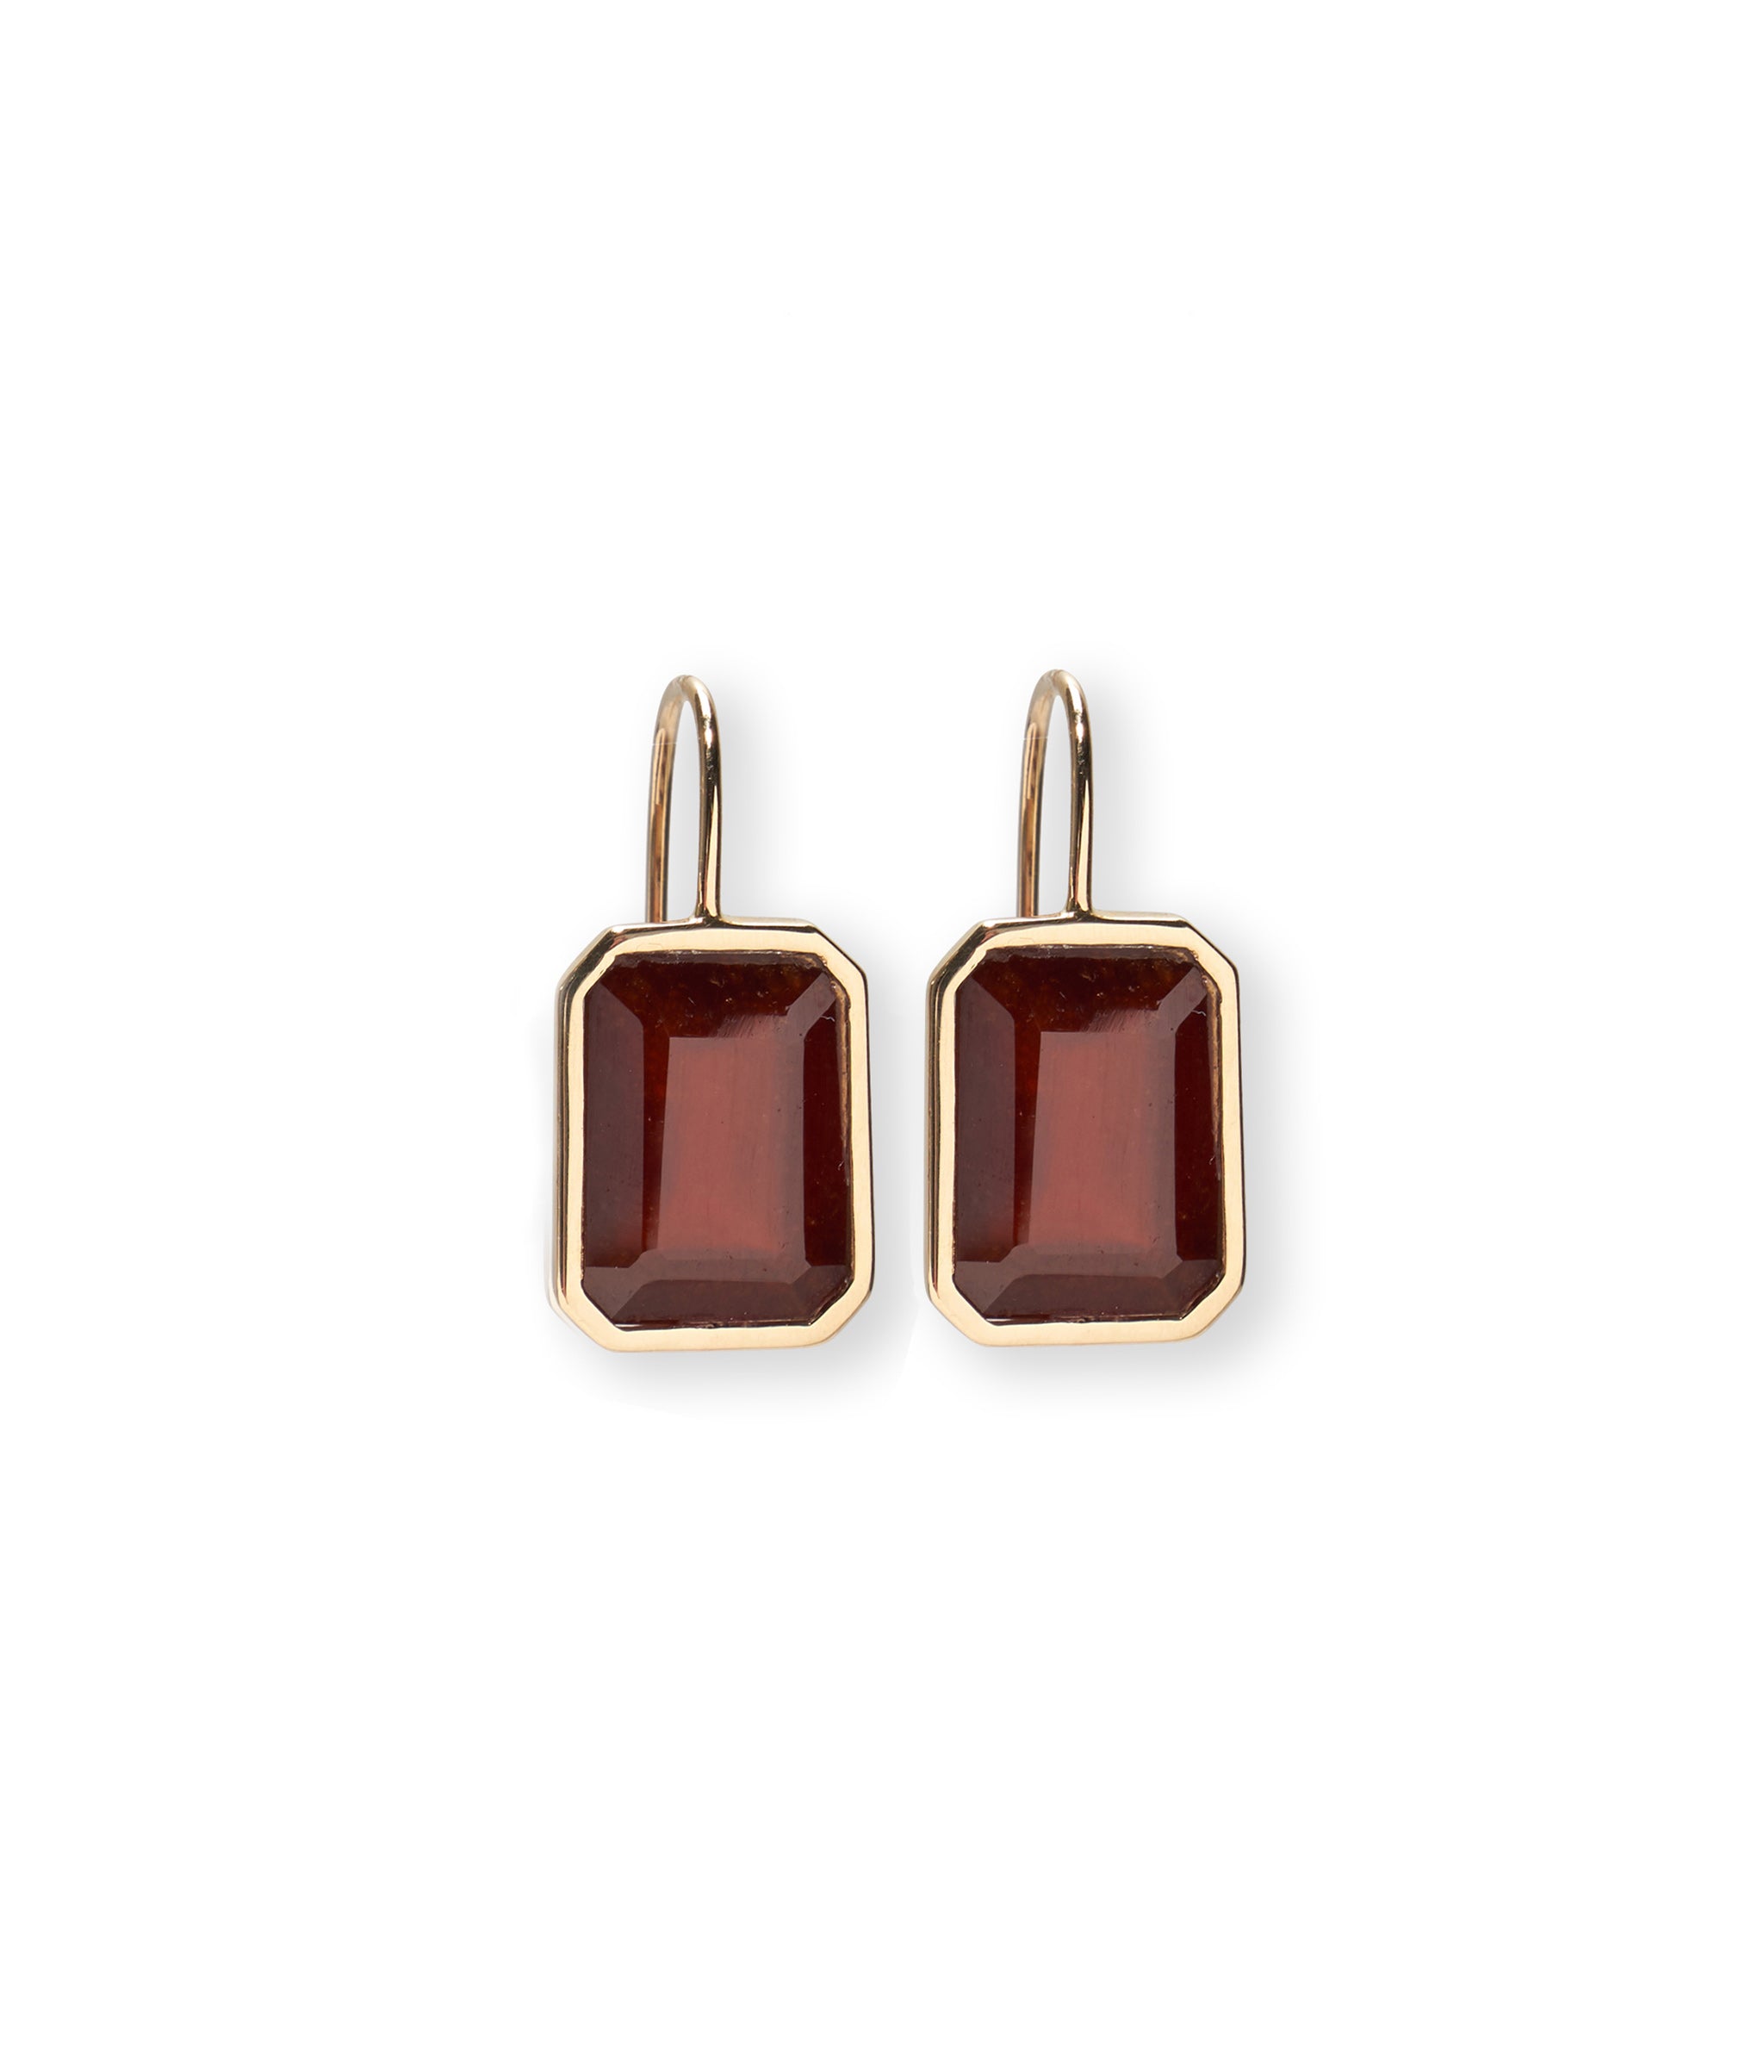 Aria Earrings in Hessonite Garnet. Featuring large, faceted hessonite garnet stones with 14k gold bezels and earwires.